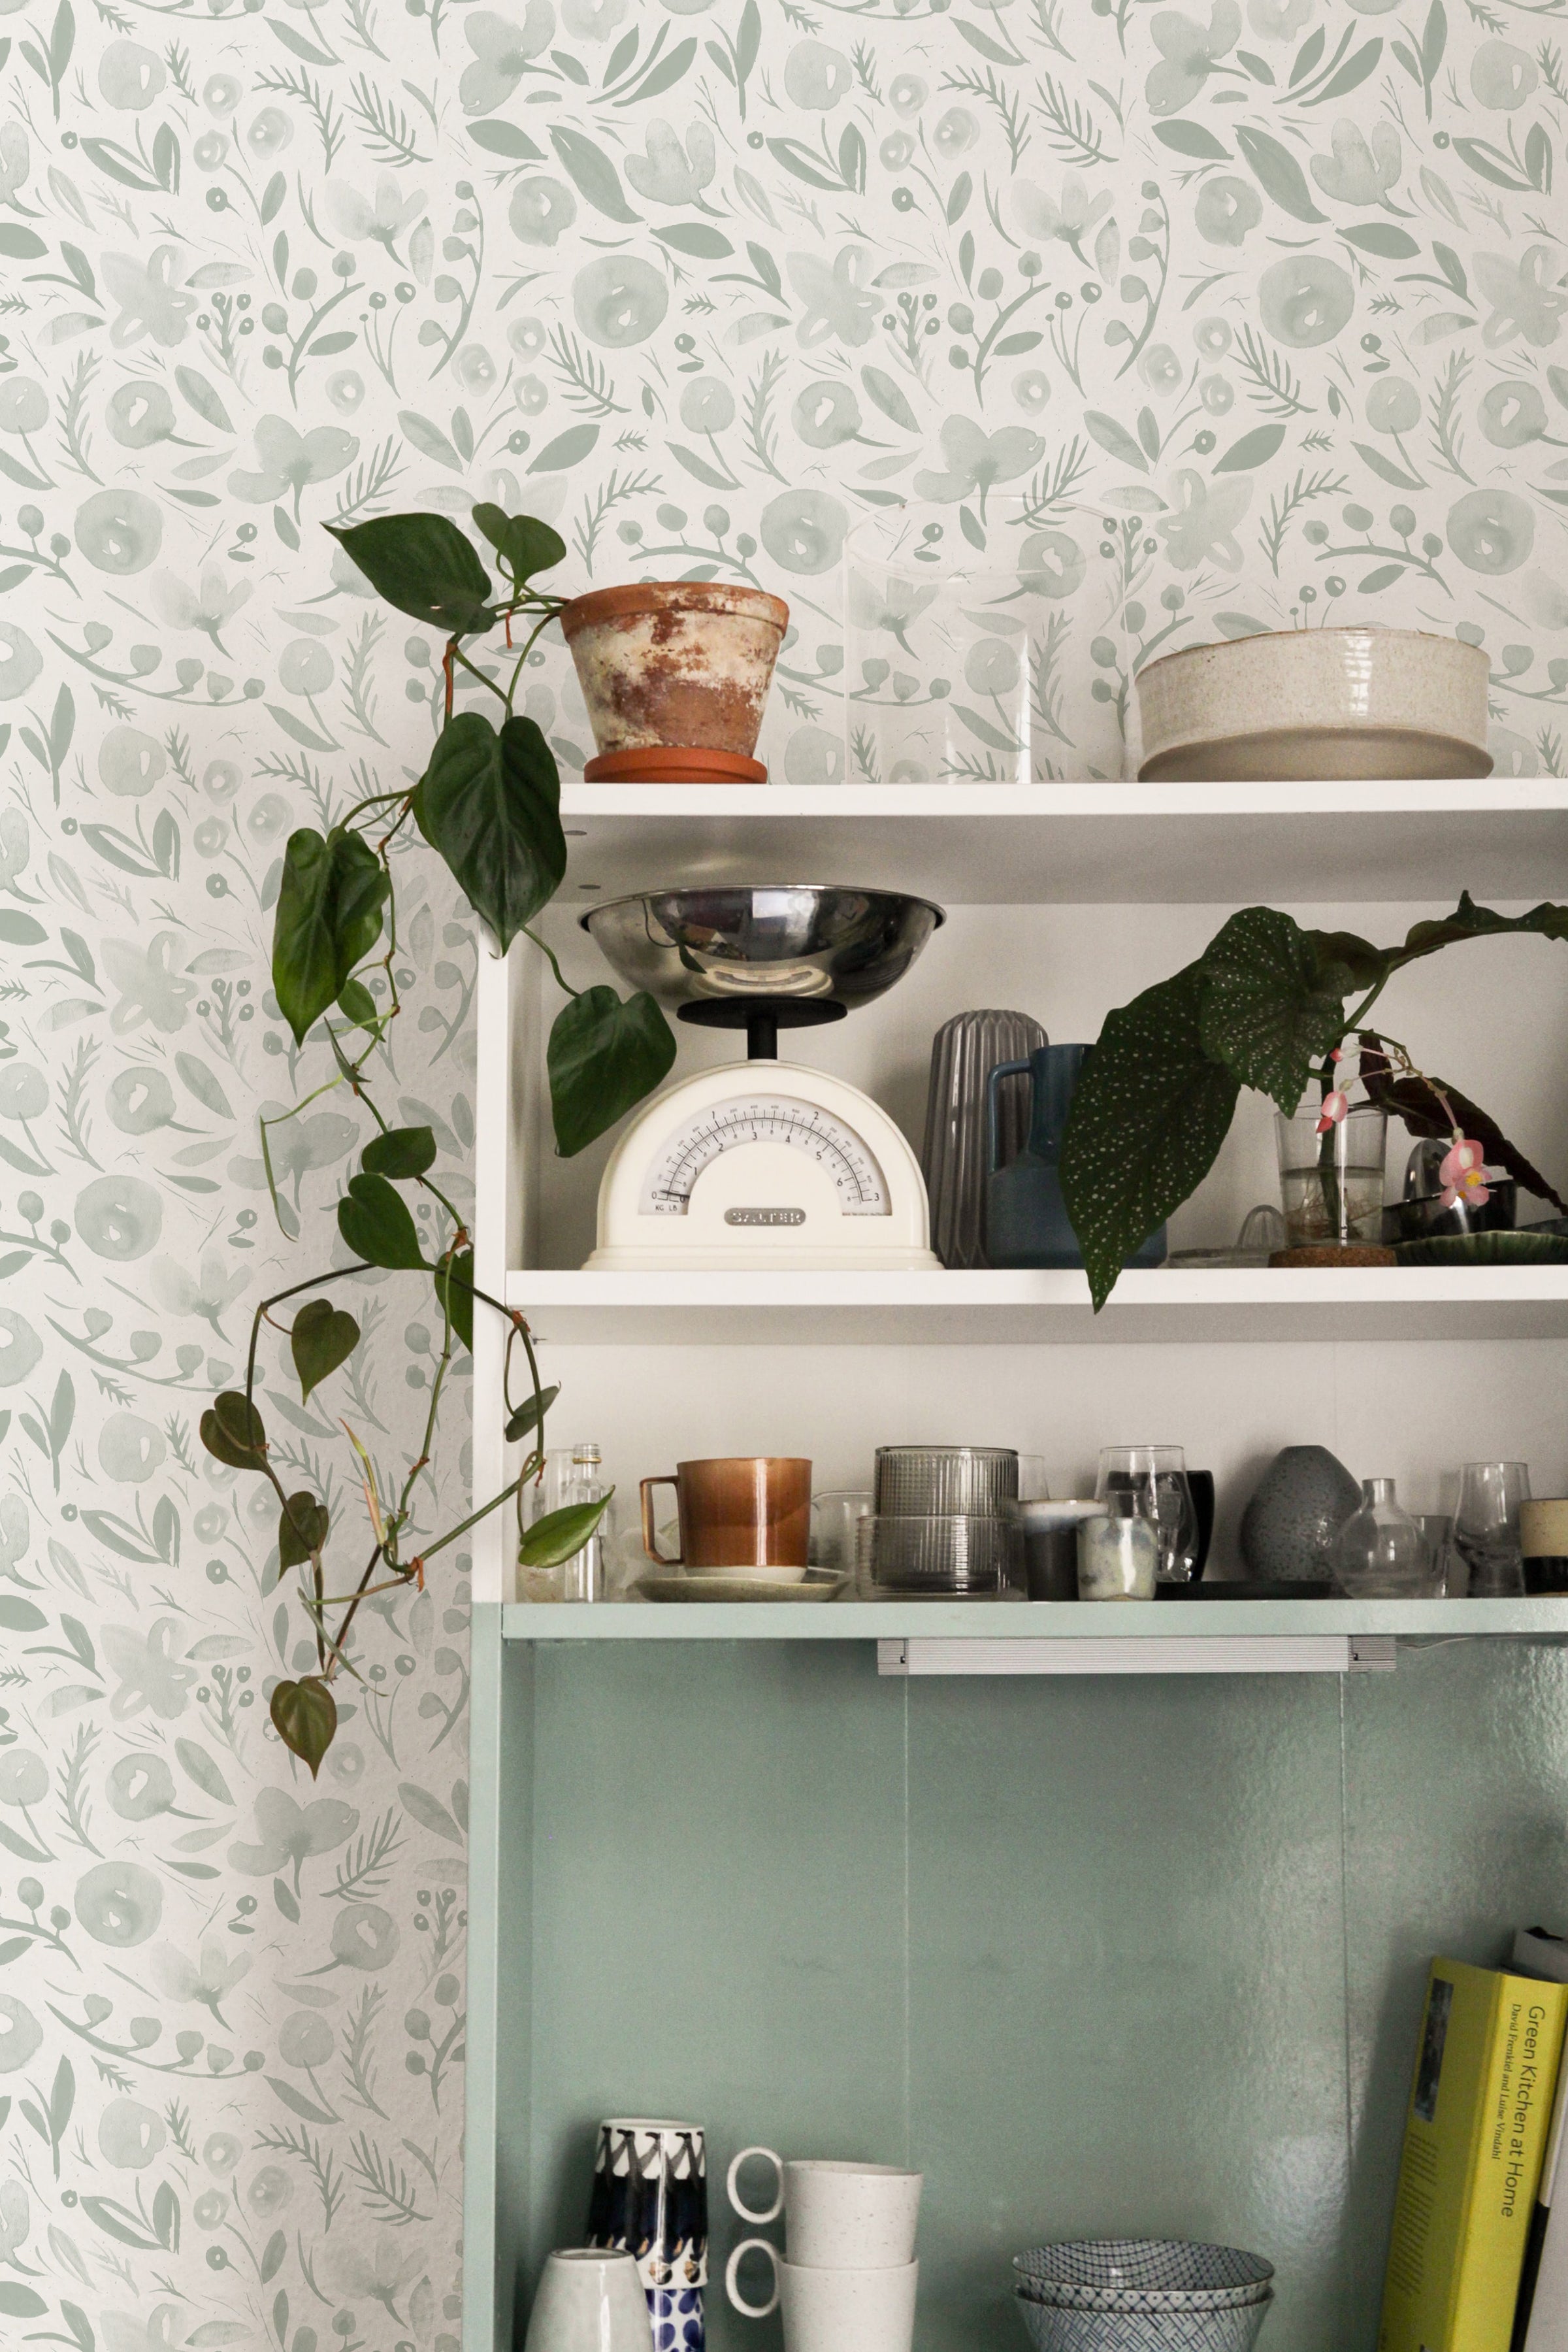 A cozy kitchen corner showcasing the Botanica Wallpaper, adorned with a delicate and elegant botanical pattern in soft shades of green. The wallpaper provides a natural and refreshing backdrop to a white shelving unit, which is decorated with an assortment of household items including a vintage scale, a rustic pot, and various kitchenware, enhancing the serene and homey atmosphere of the space.